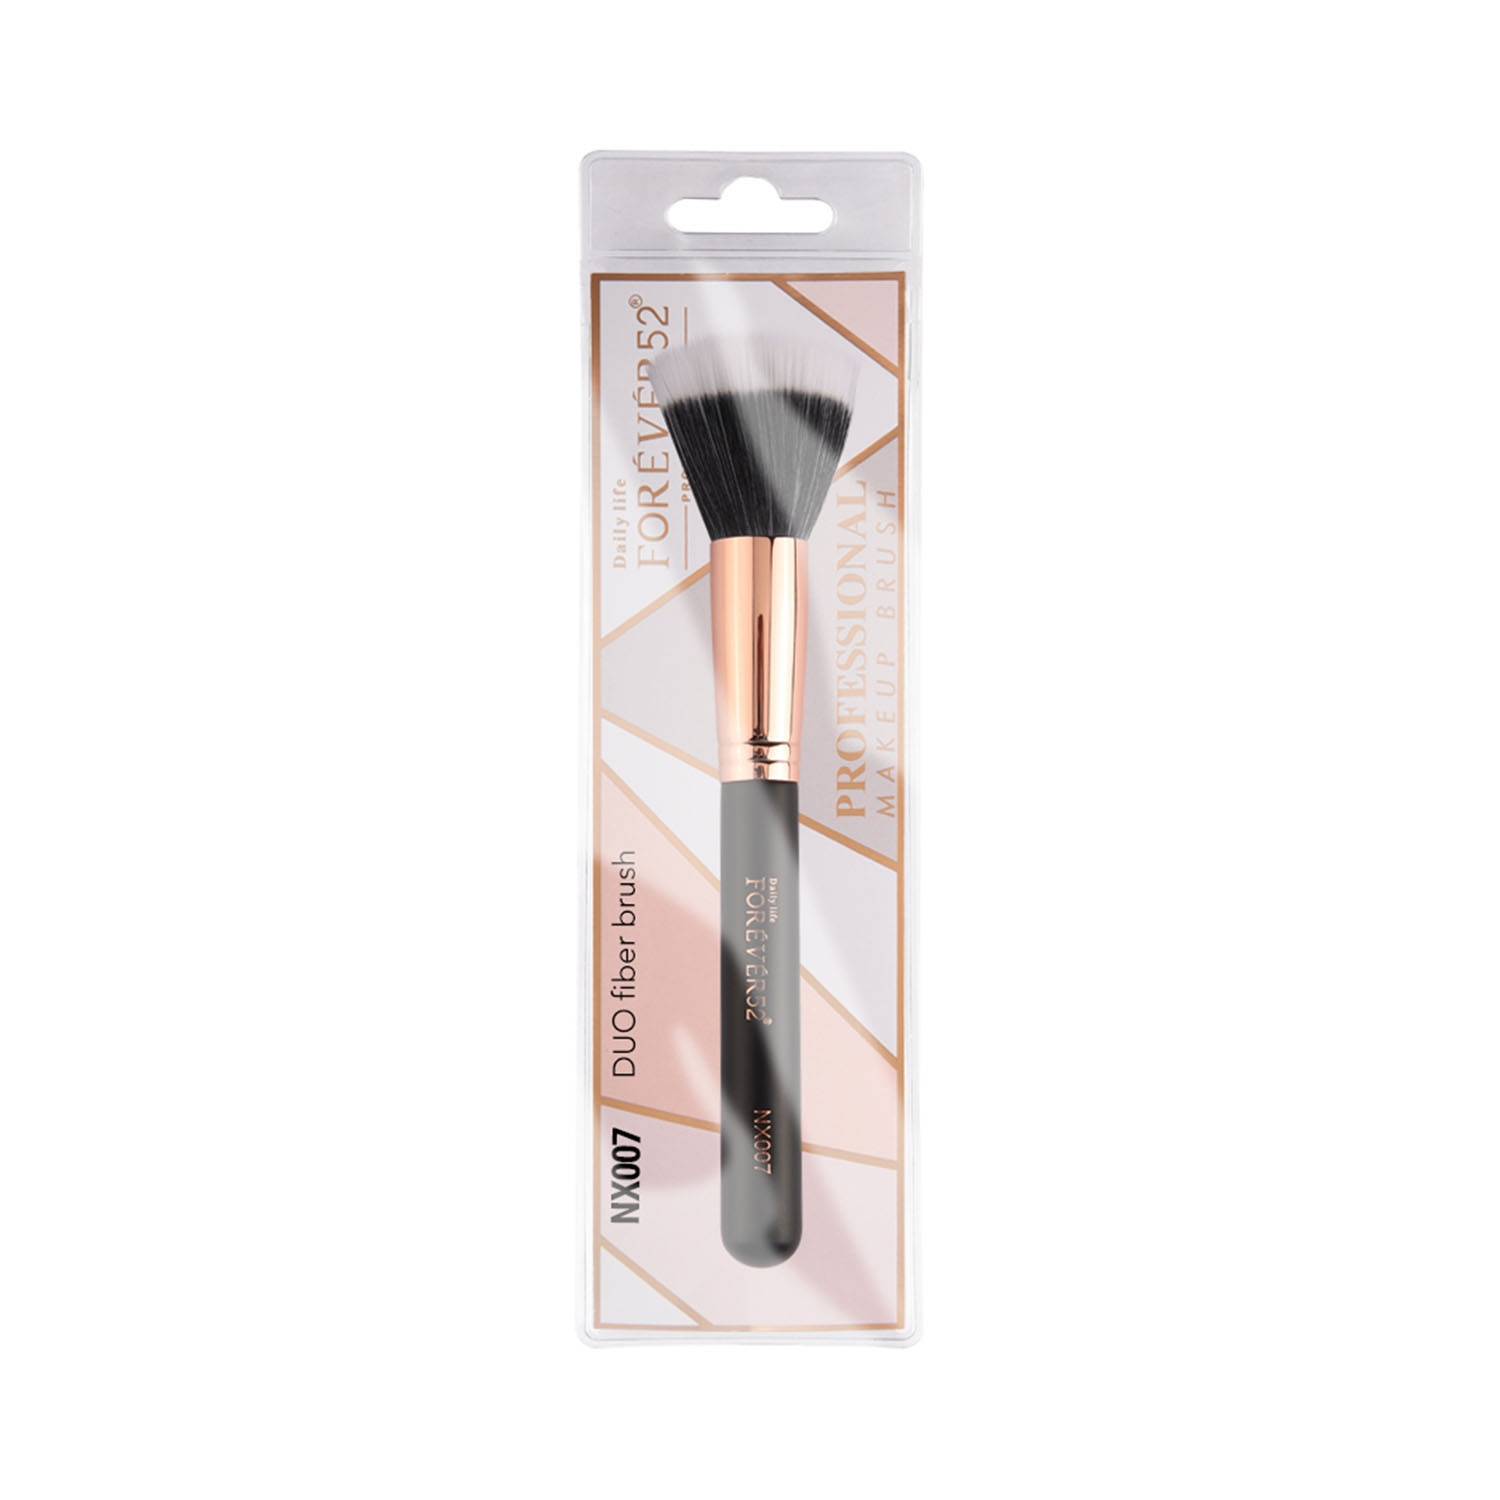 Daily Life Forever52 | Daily Life Forever52 Duo Fiber Brush - NX007 (1Pc)